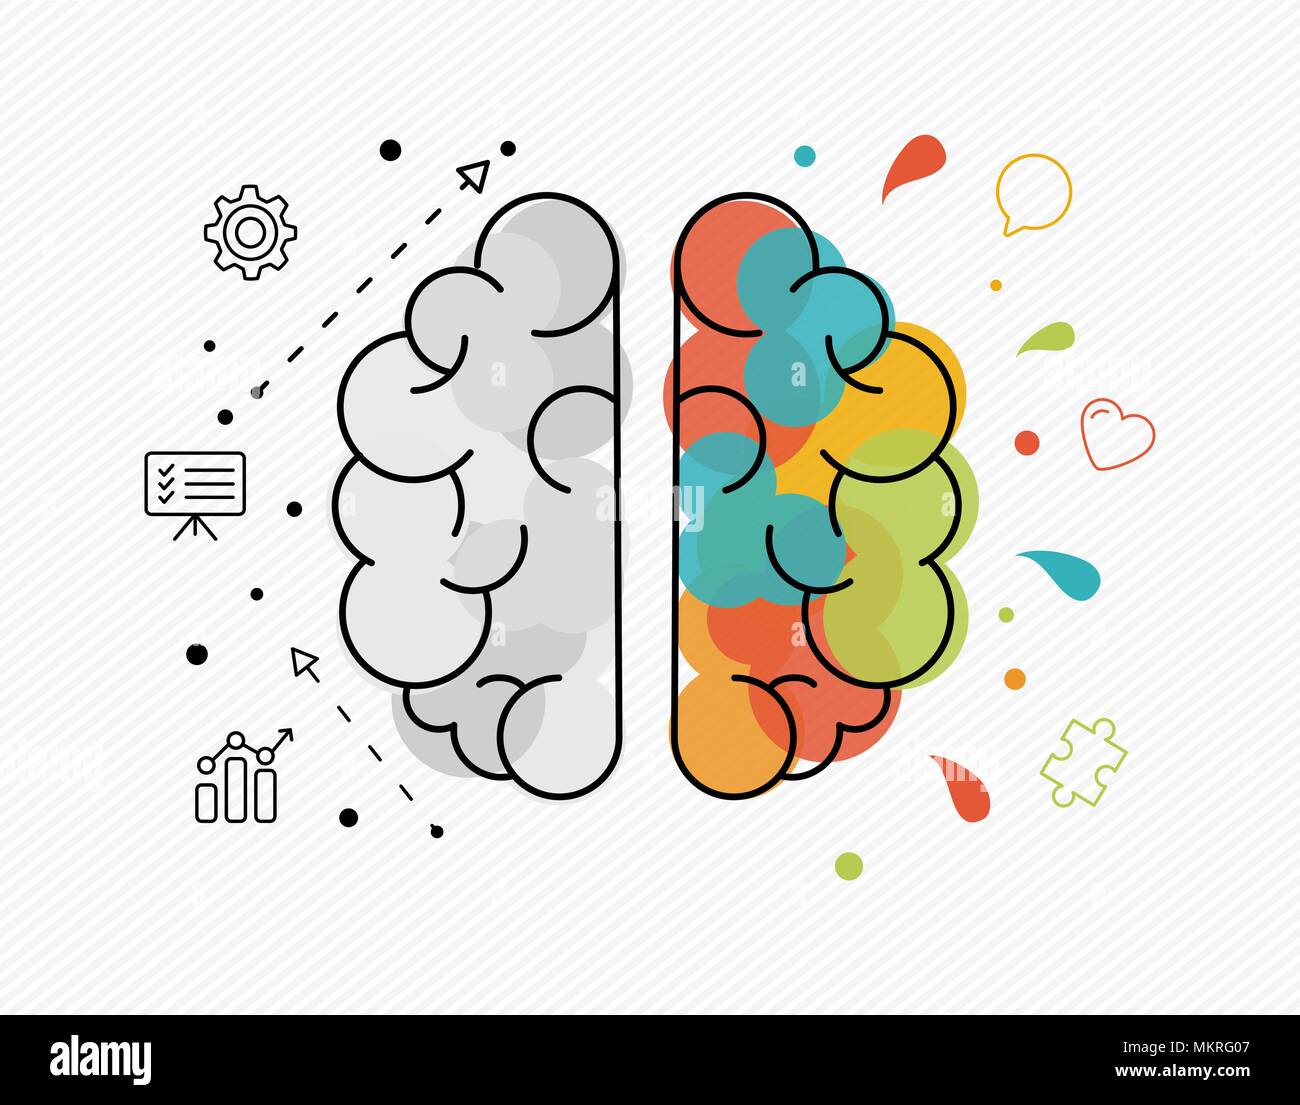 Human brain hemisphere concept illustration of rational and creative thinking. Ideal for new ideas in business or artistic project. EPS10 vector. Stock Vector